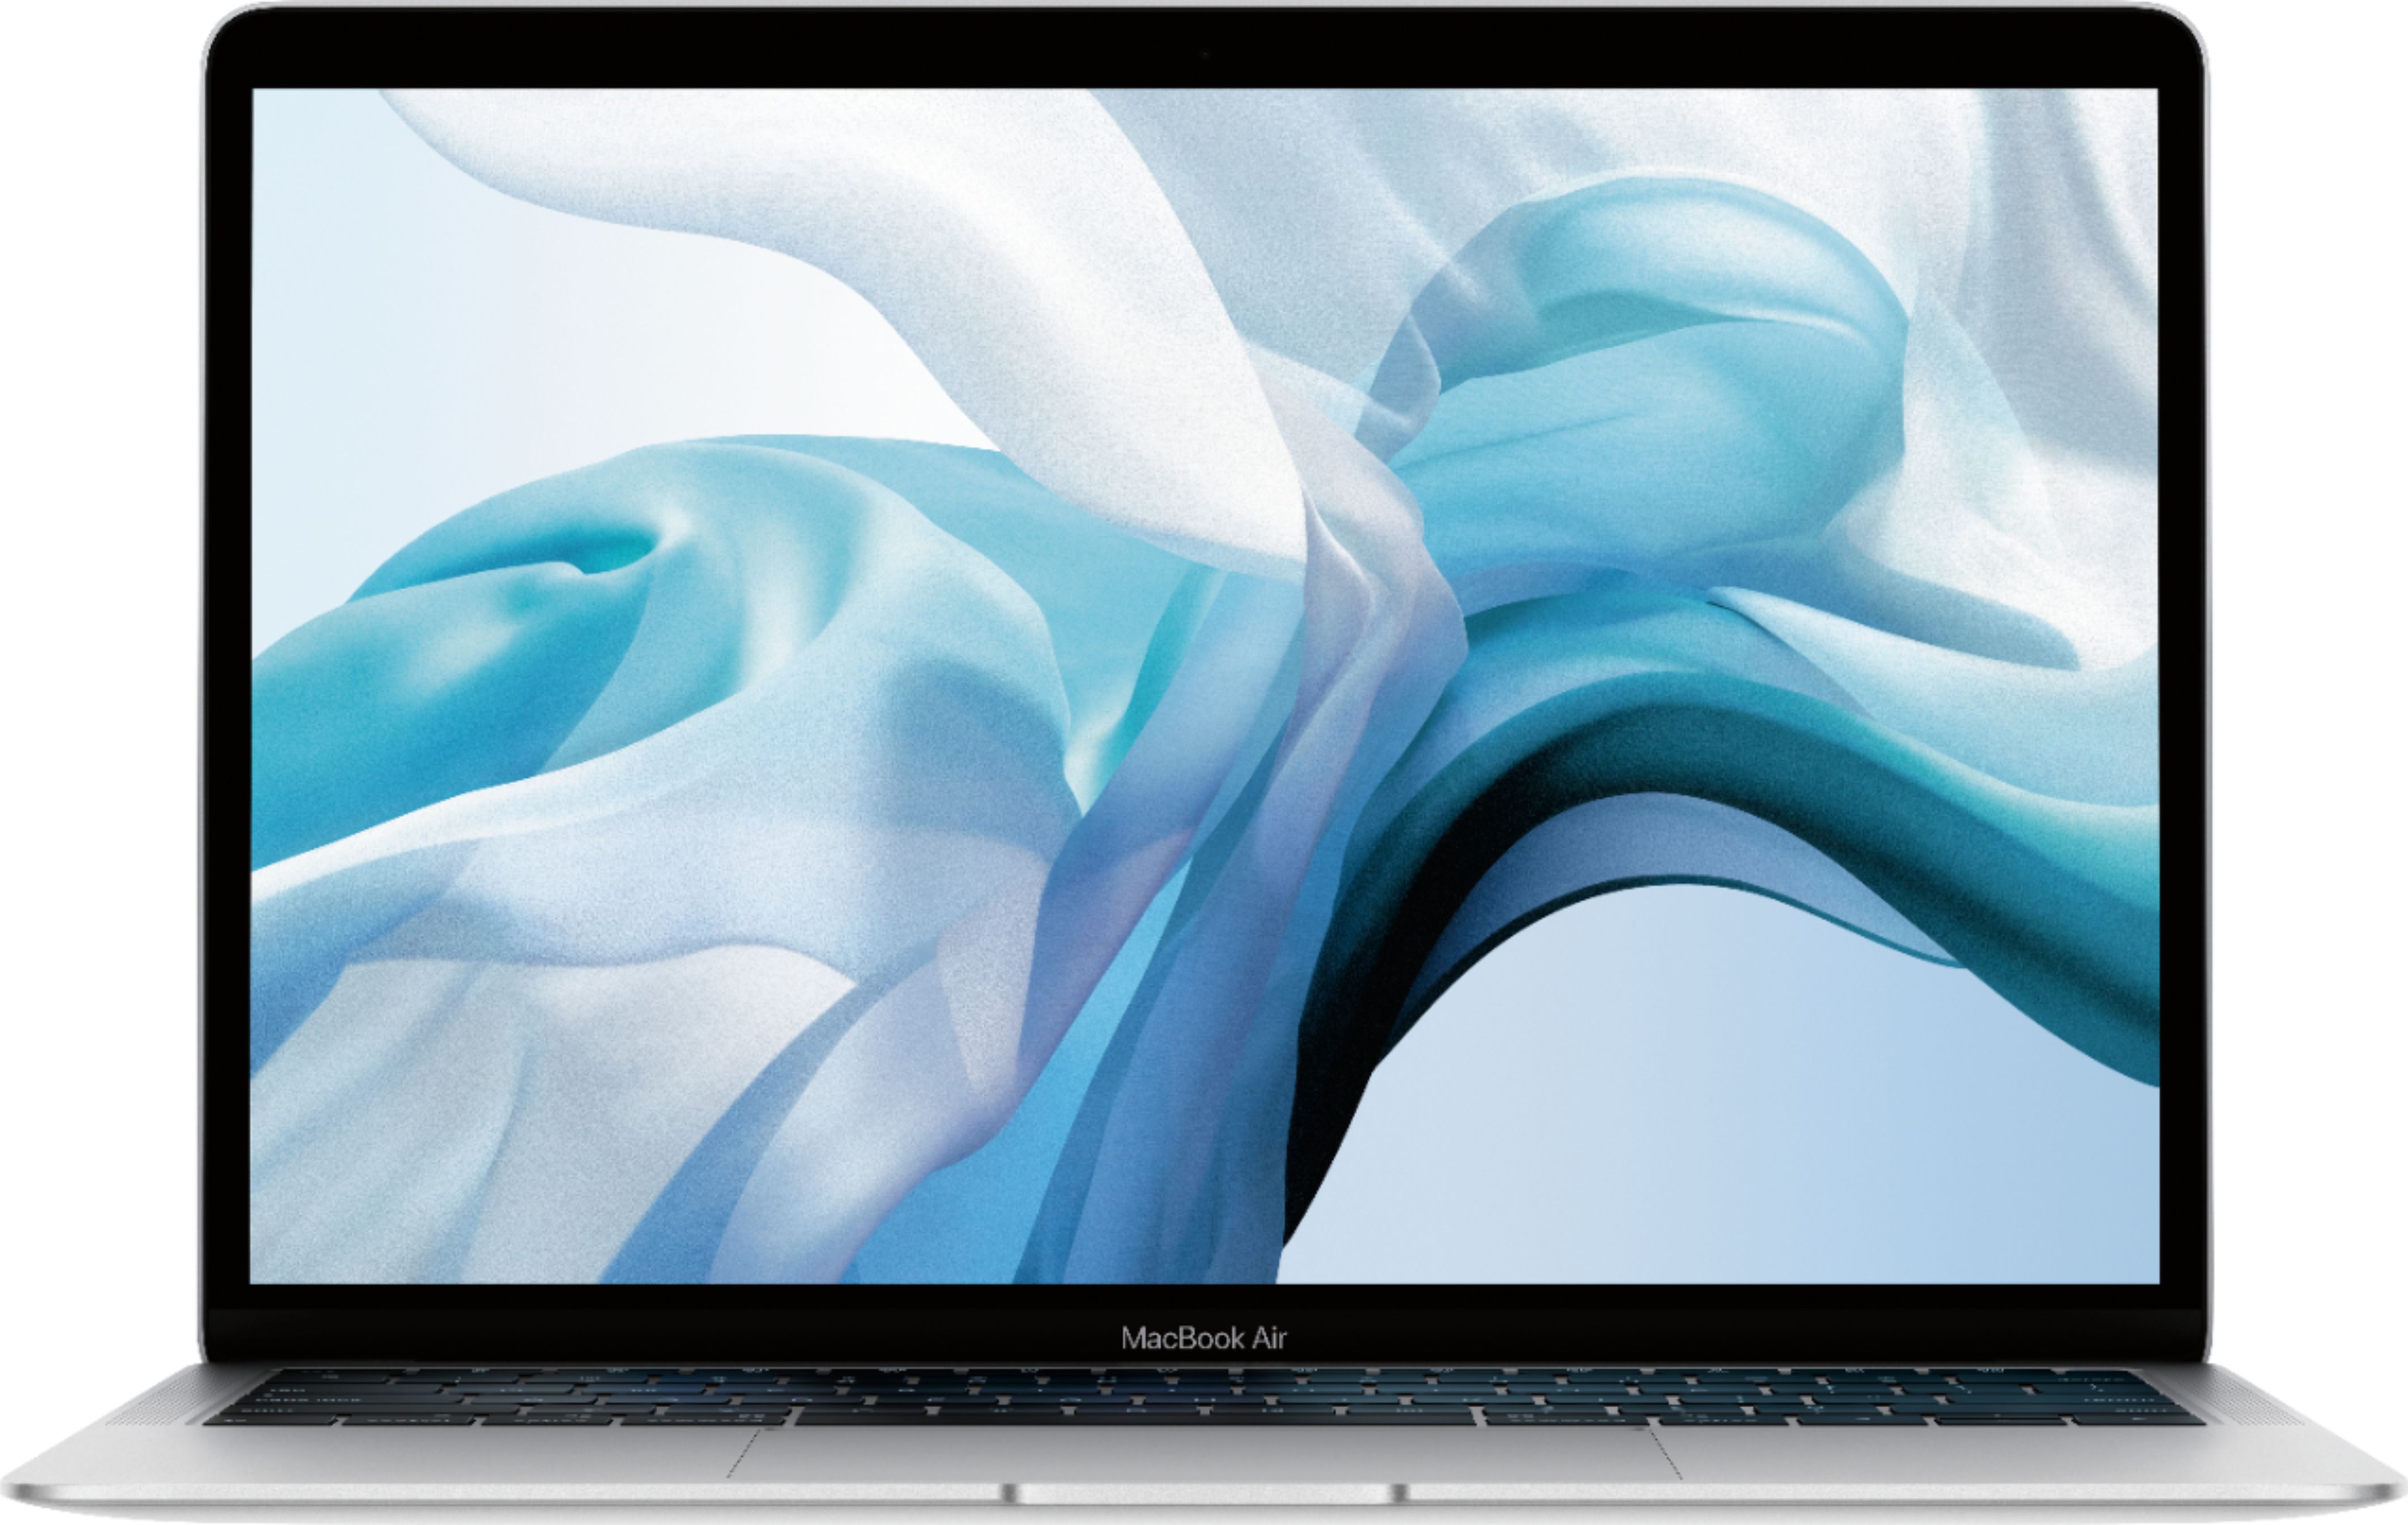 Apple - MacBook Air 13.3" Laptop with Touch ID - Intel Core i5 - 8GB Memory - 256GB Solid State Drive - Silver